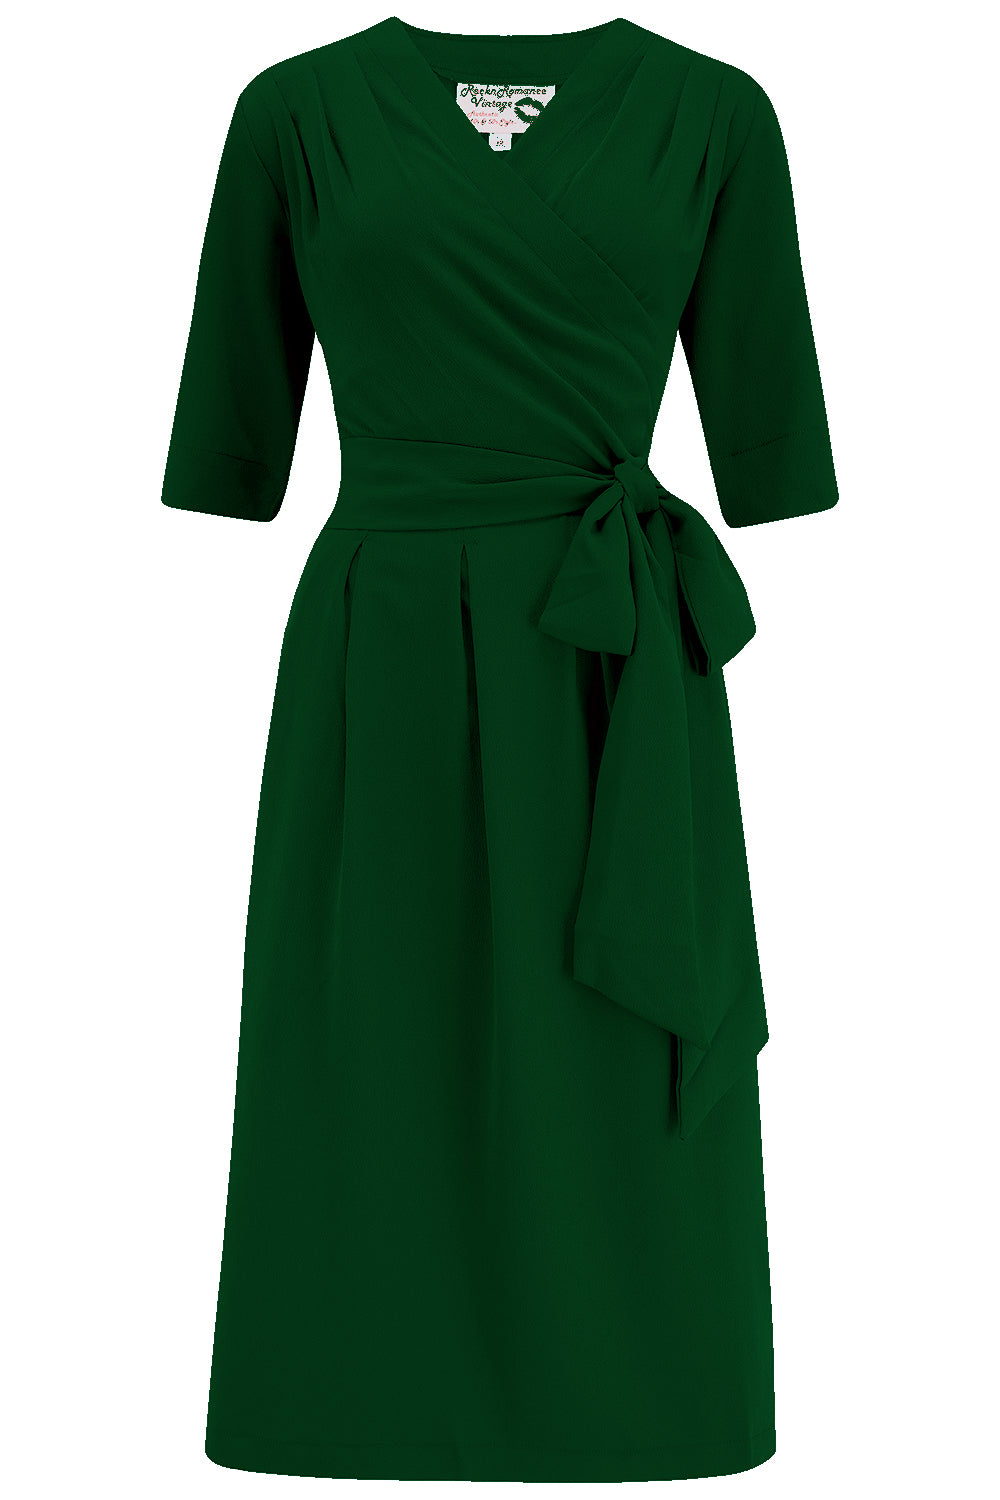 The "Vivien" Full Wrap Dress in Green, True 1940s To Early 1950s Style